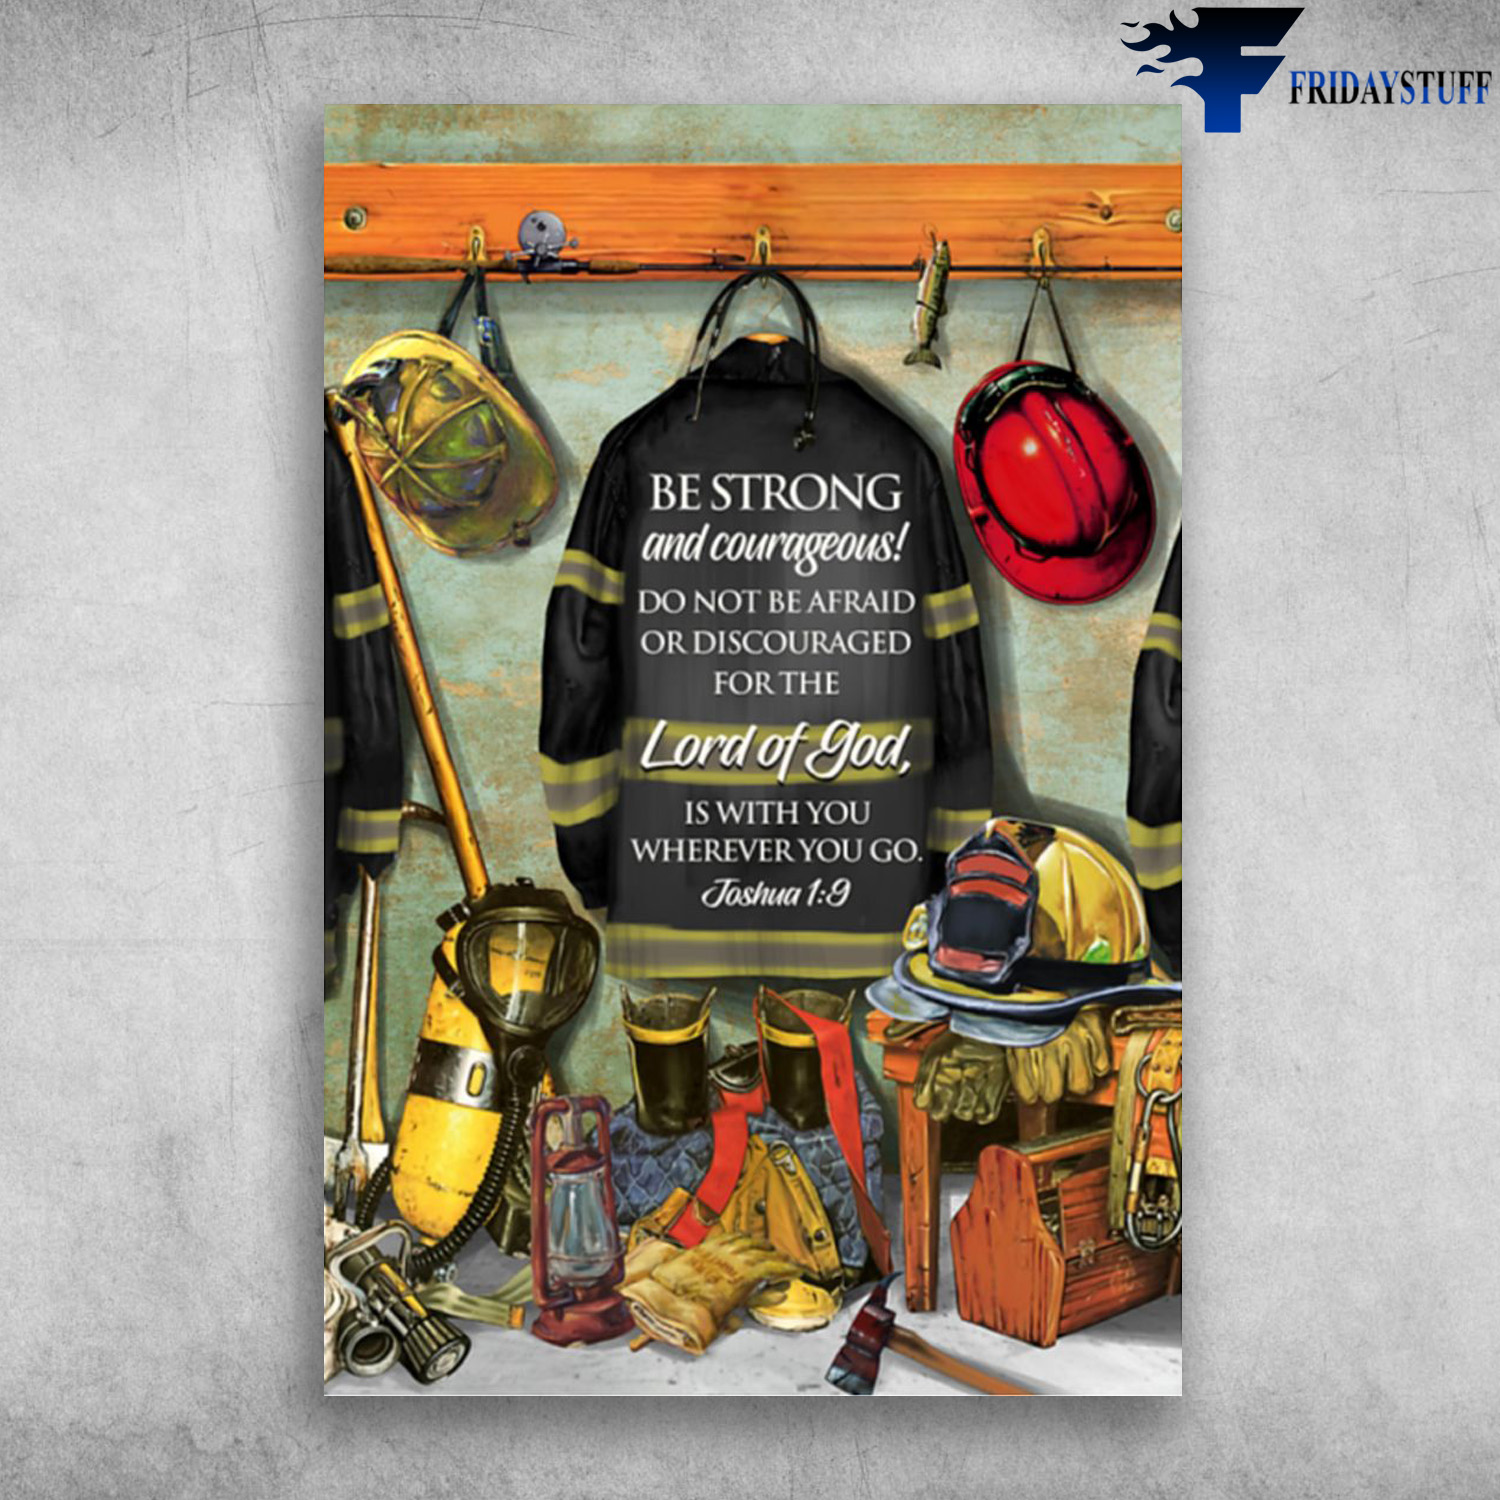 Firefighter Tools - Be Strong And Courageous, Do Not Be Afraid Or Discouraged For The Lord Of God, Is With You Wherever You Go, Joshua1.9